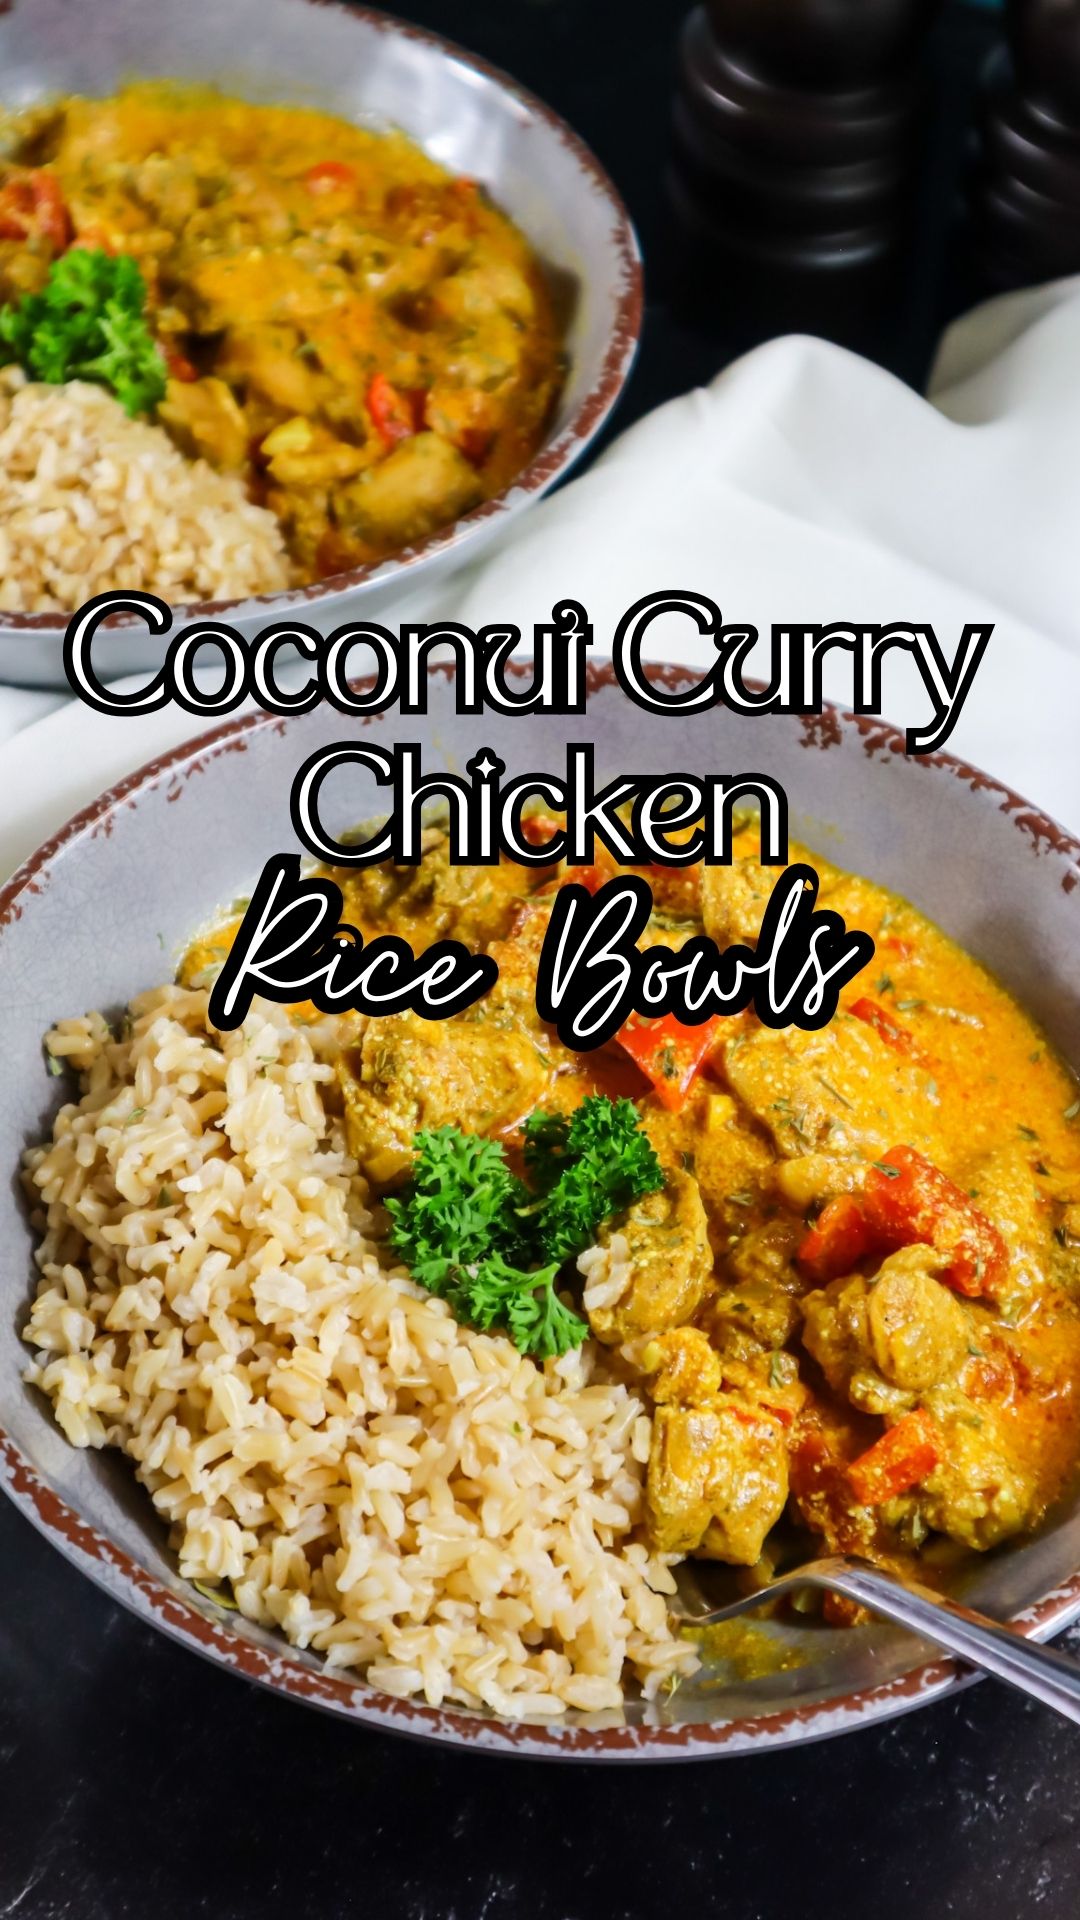 These delicious Coconut Curry Chicken Rice Bowls are rich in flavor and the perfect quick and easy dinner solution or meal prep idea!